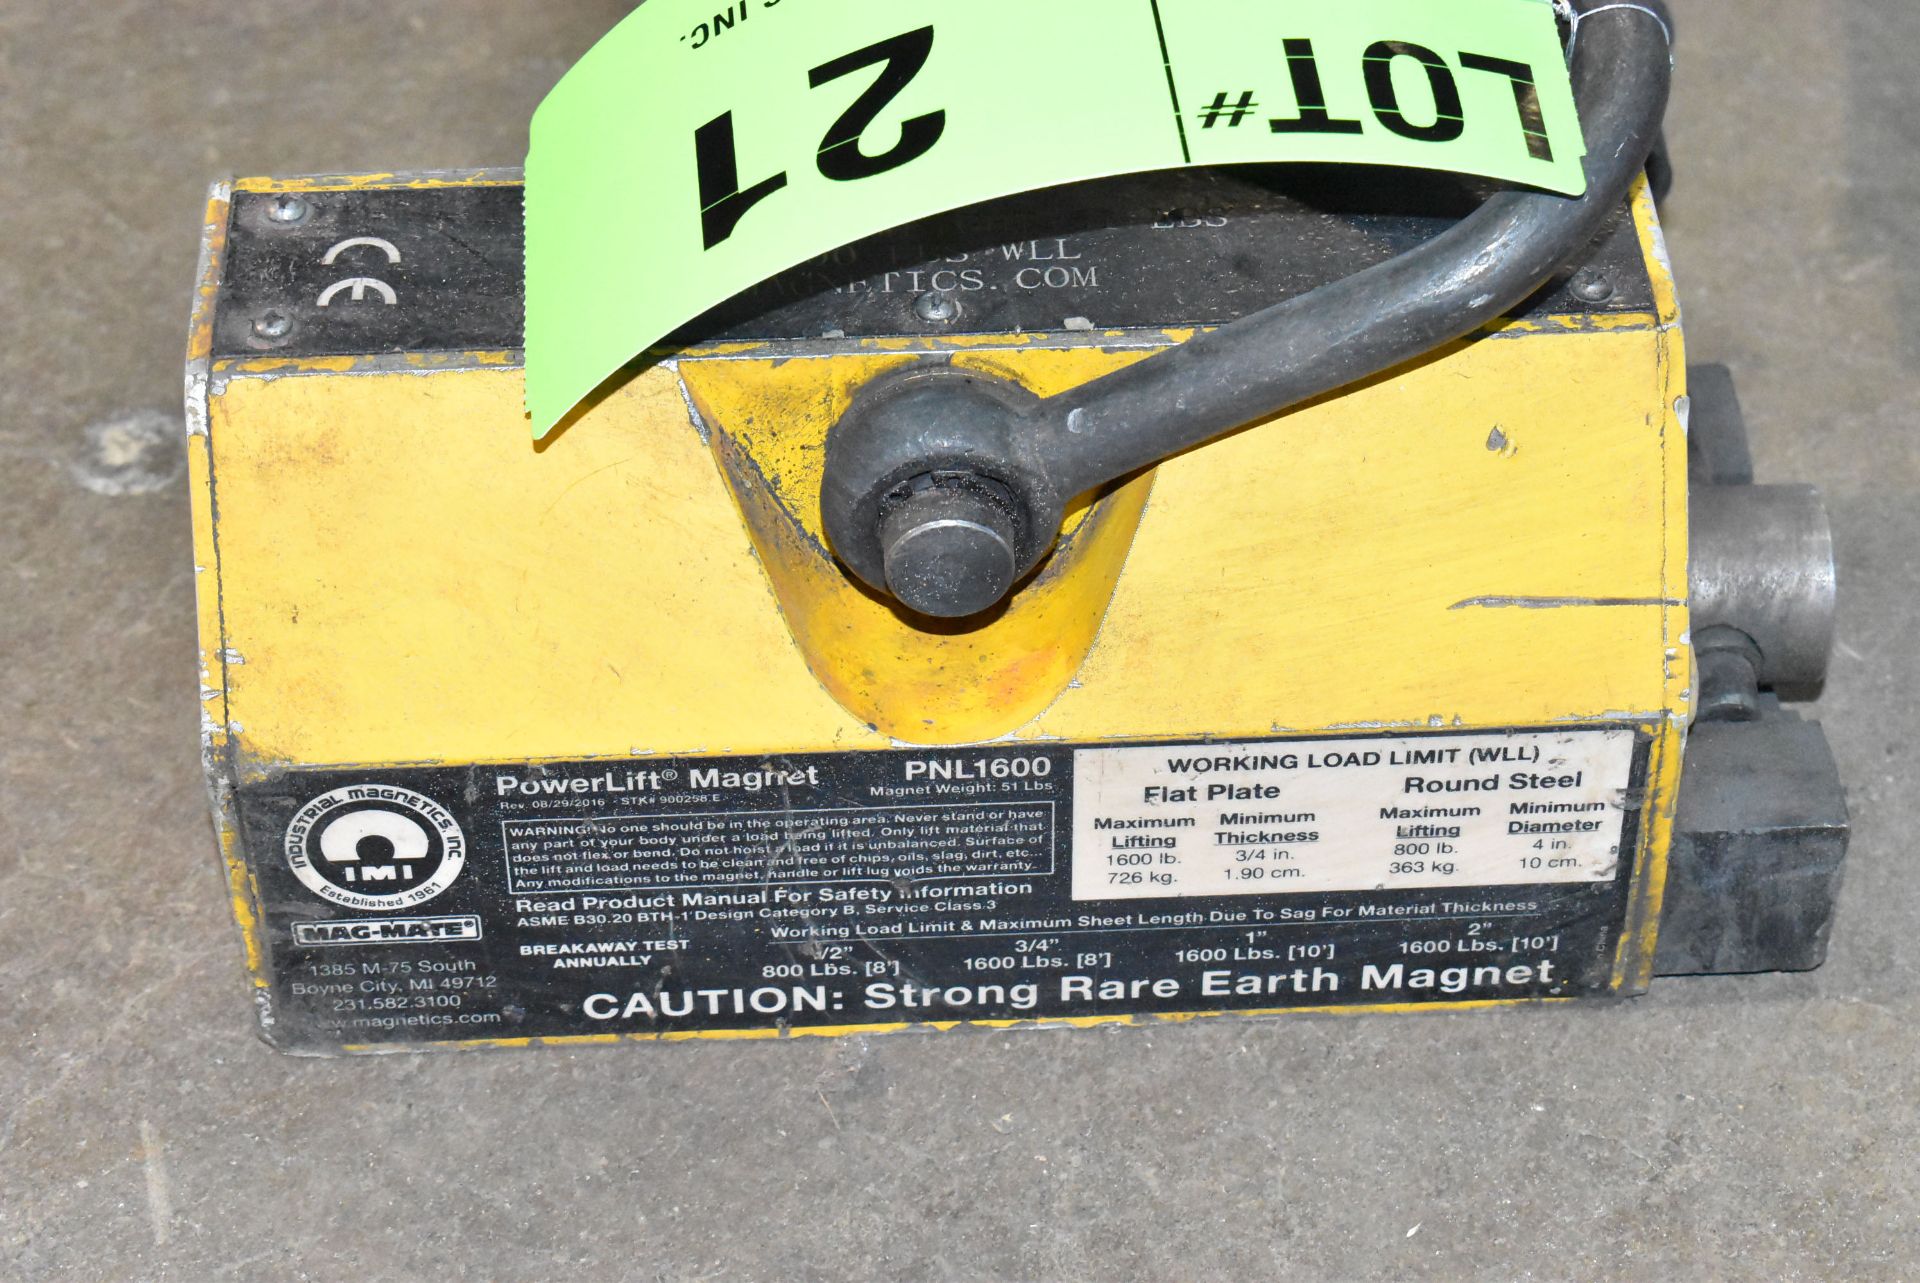 IMI MAG-MATE PNL1600 POWERLIFT MAGNET WITH 1,600 LB MAXIMUM FLAT PLATE LIFTING CAPACITY, S/N W56471 - Image 3 of 4